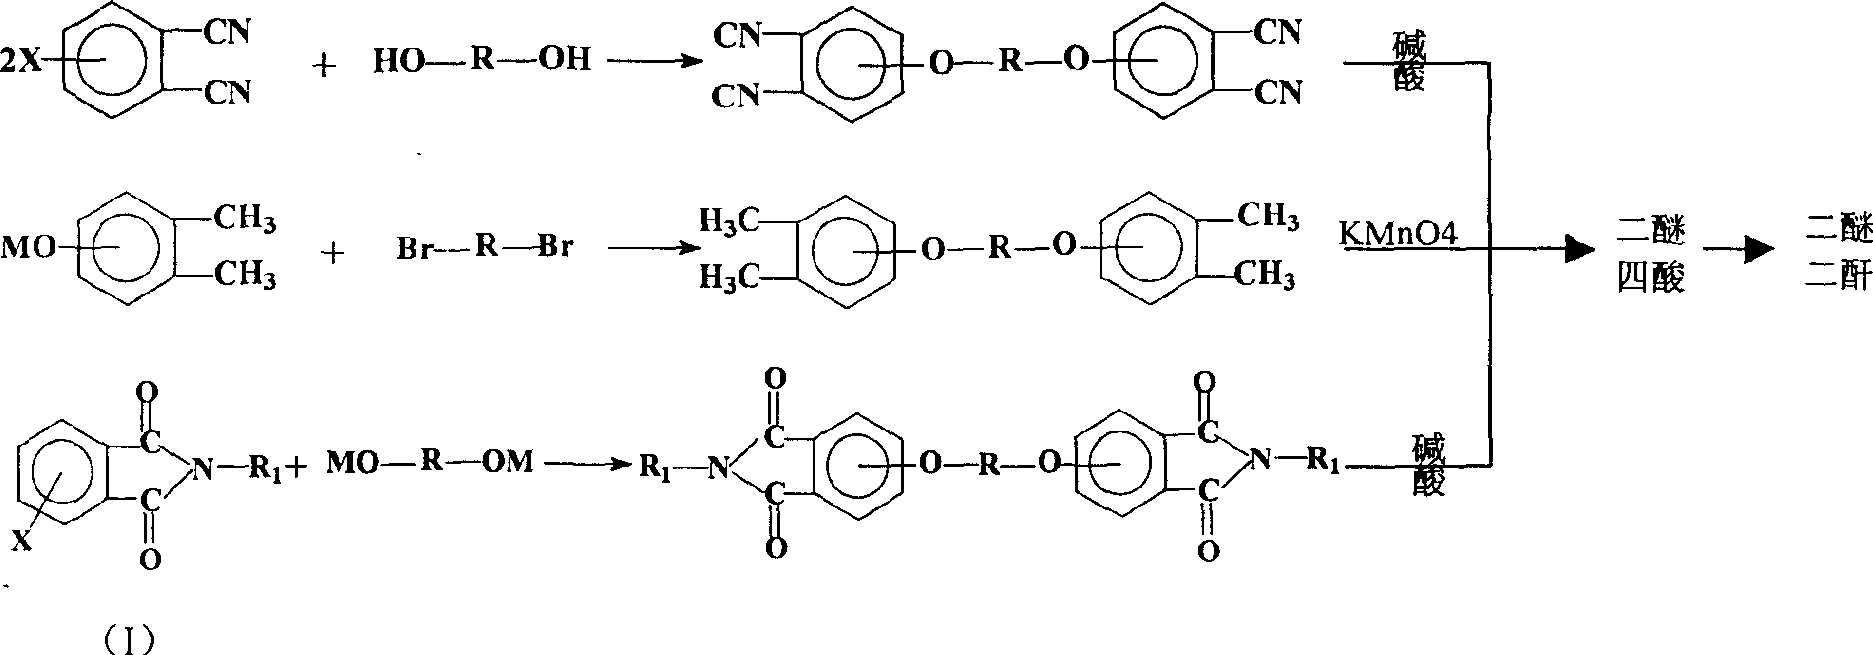 Process for synthesis of aryl bis-ether dianhydrides monomer